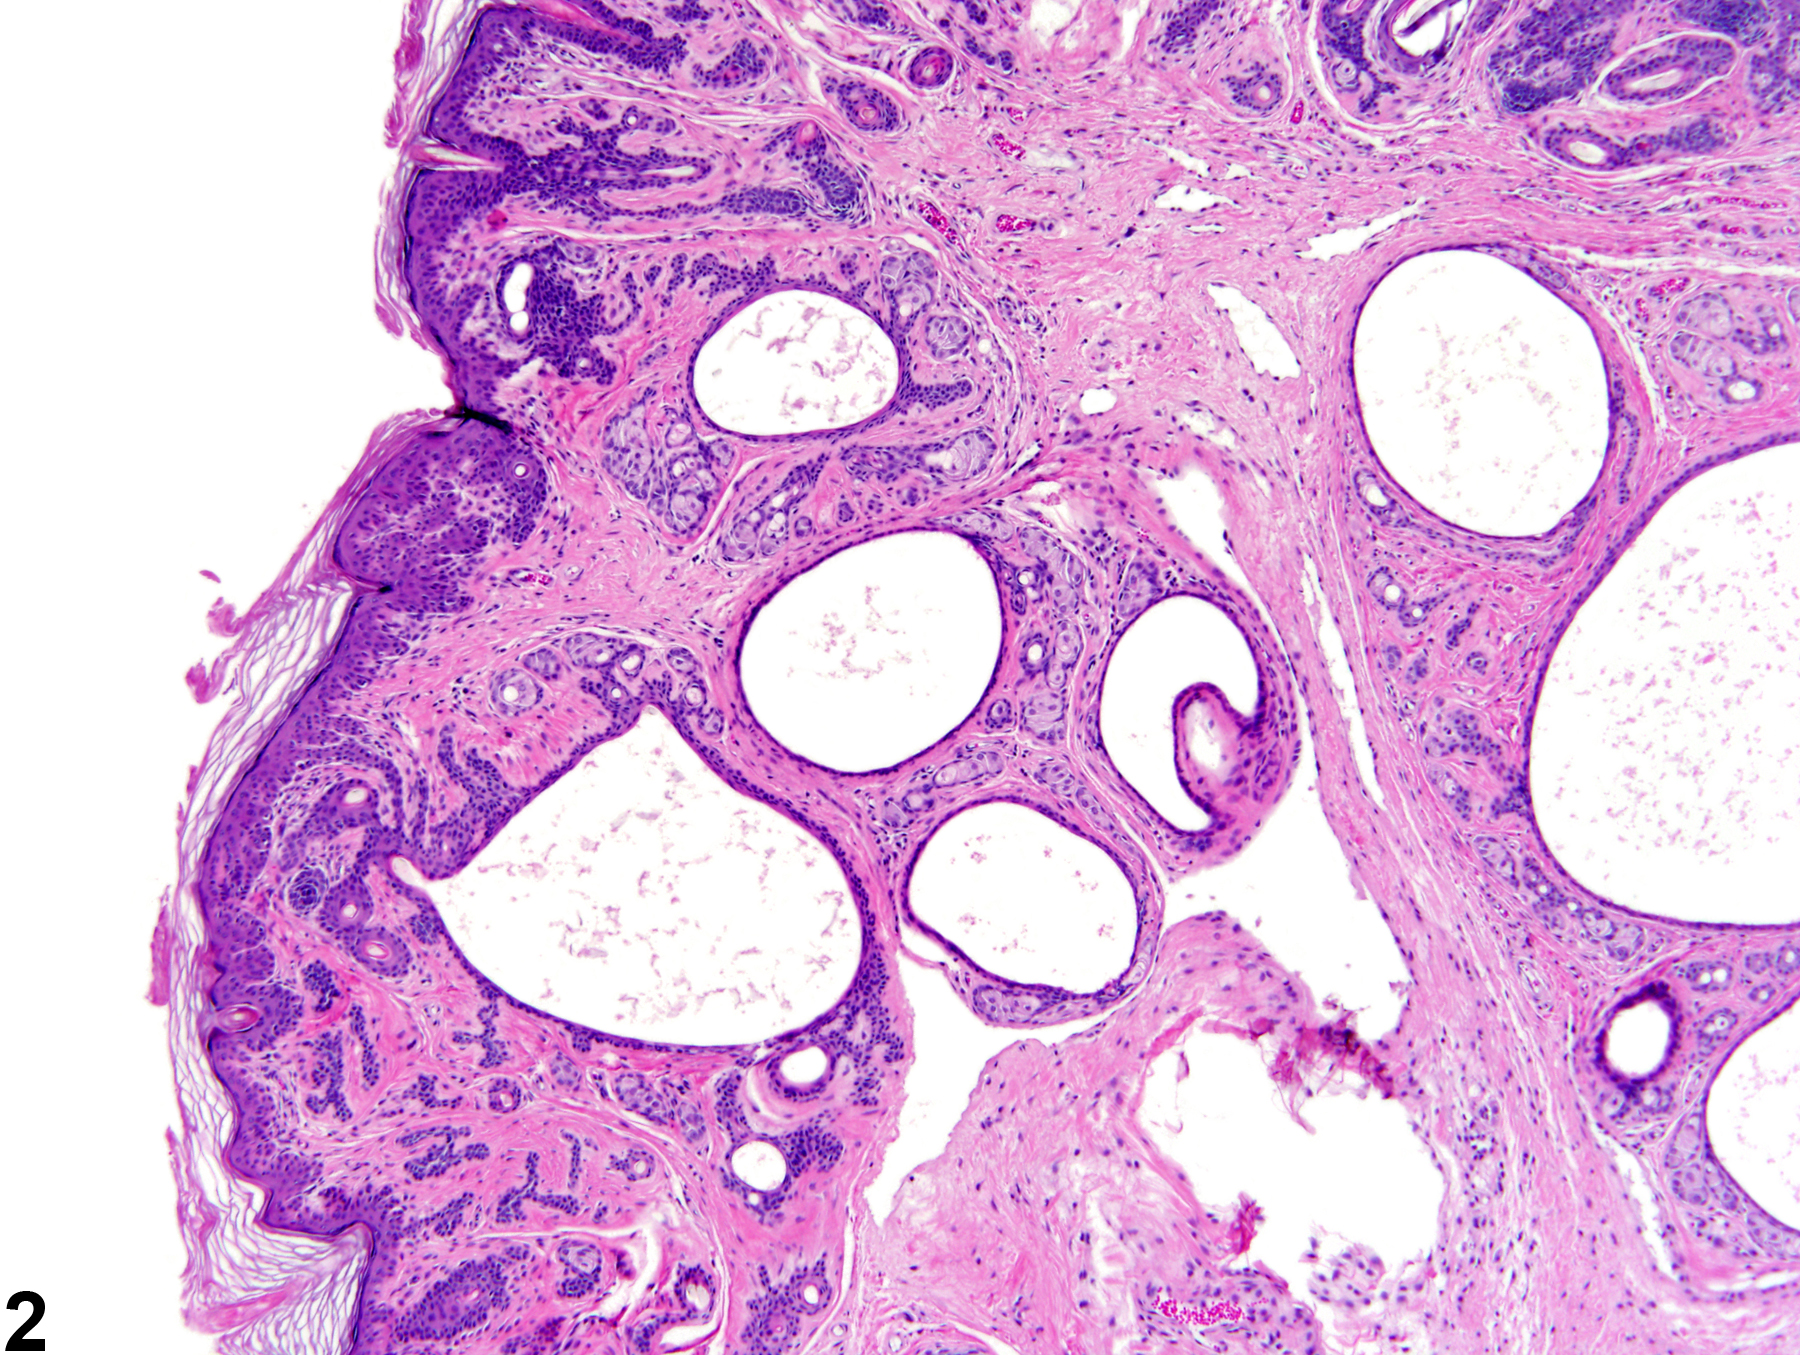 Image of fibroadnexal hamartoma in the skin from a female F344/N rat in a chronic study